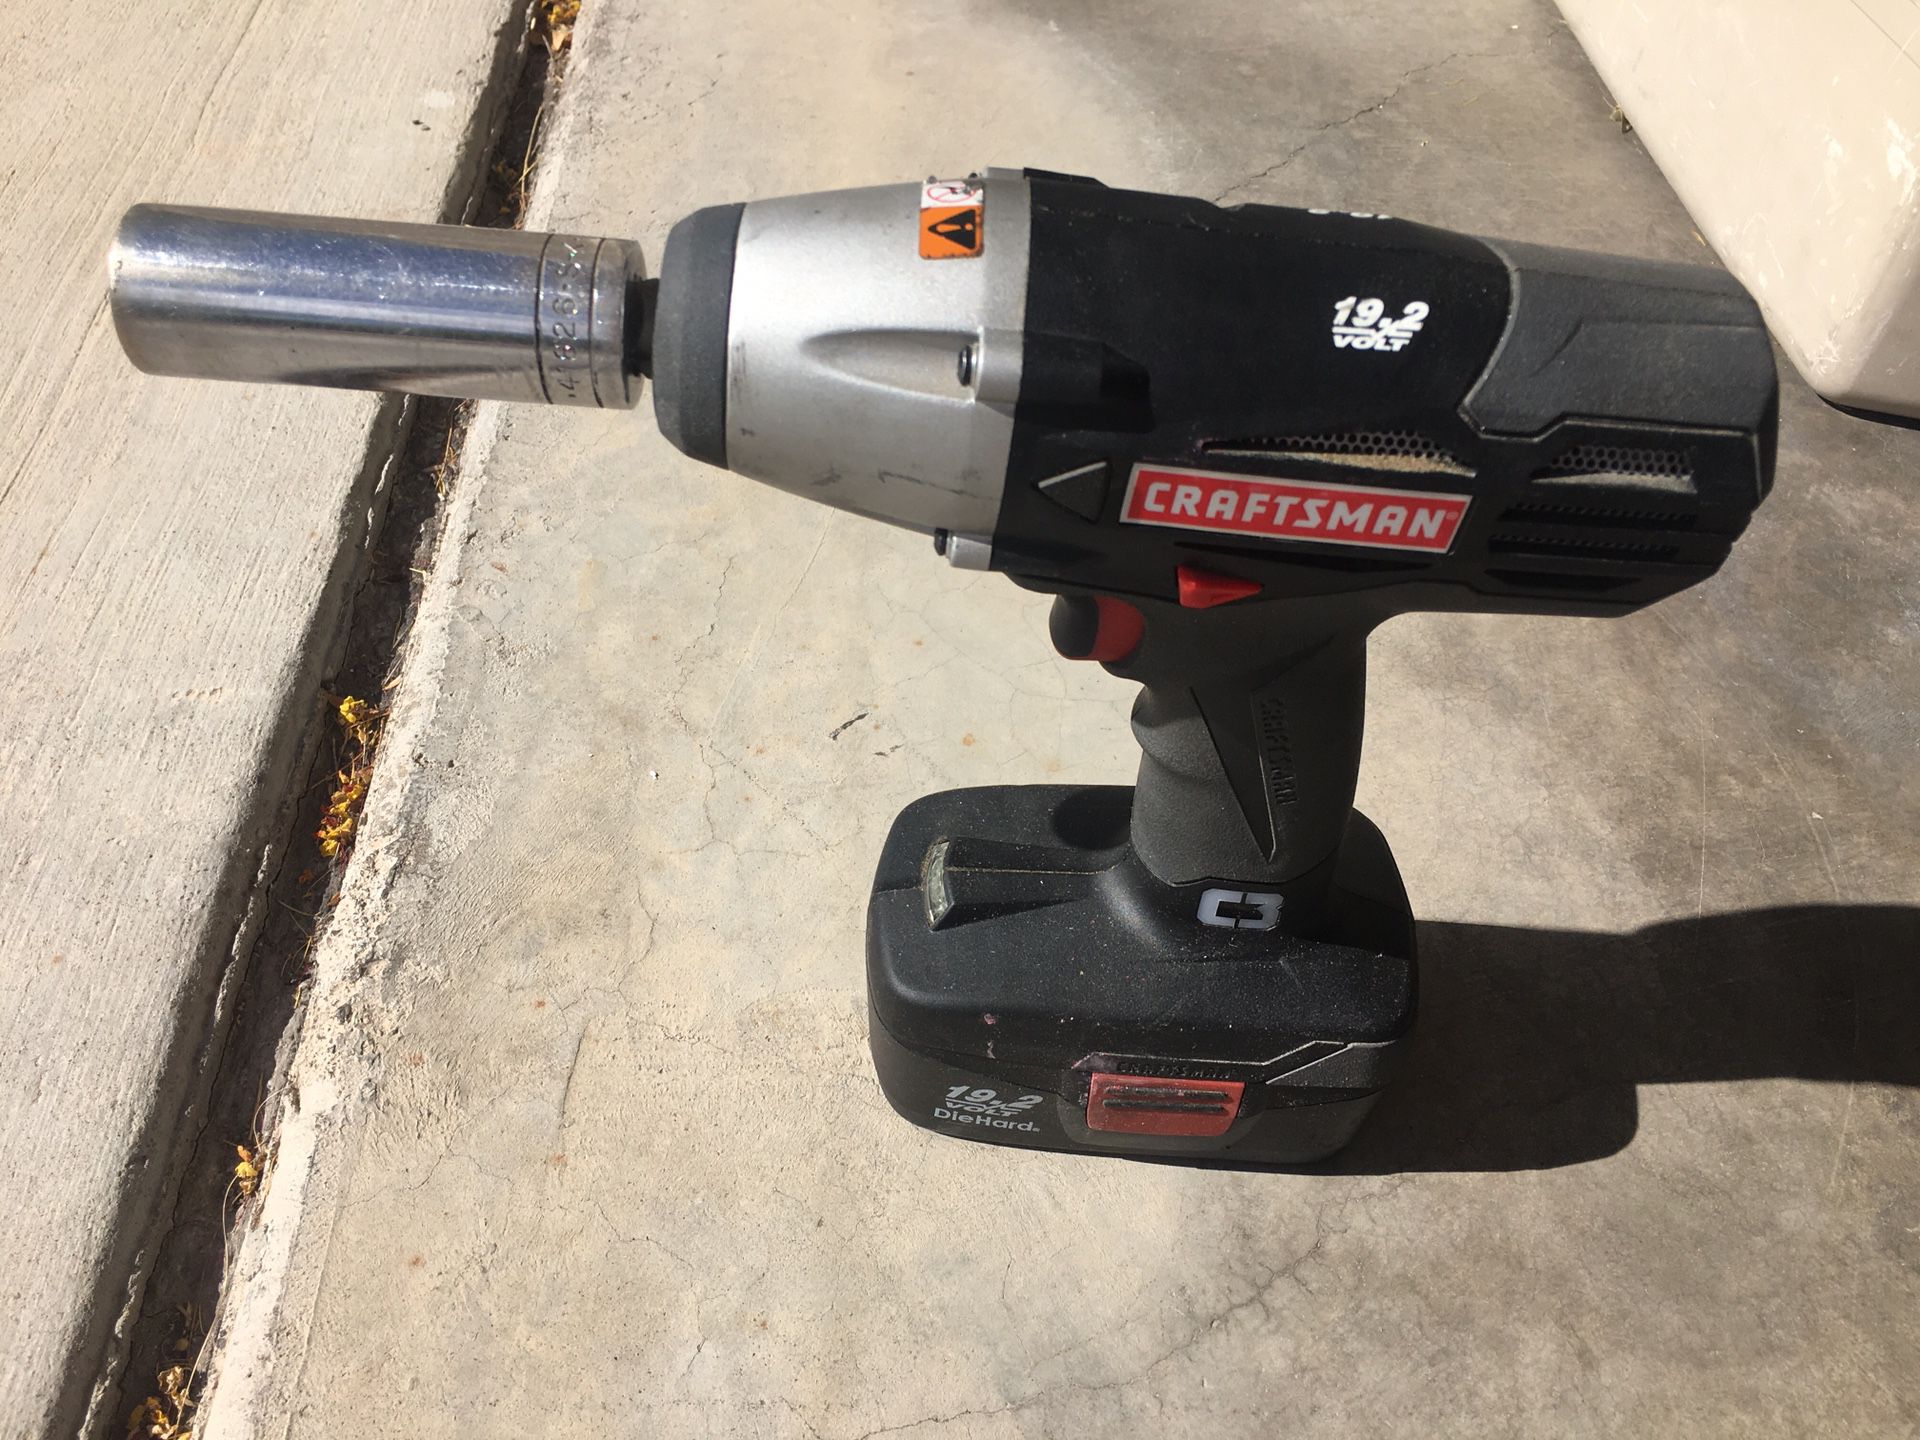 Craftsman impact wrench and 19.2 volt battery and charger